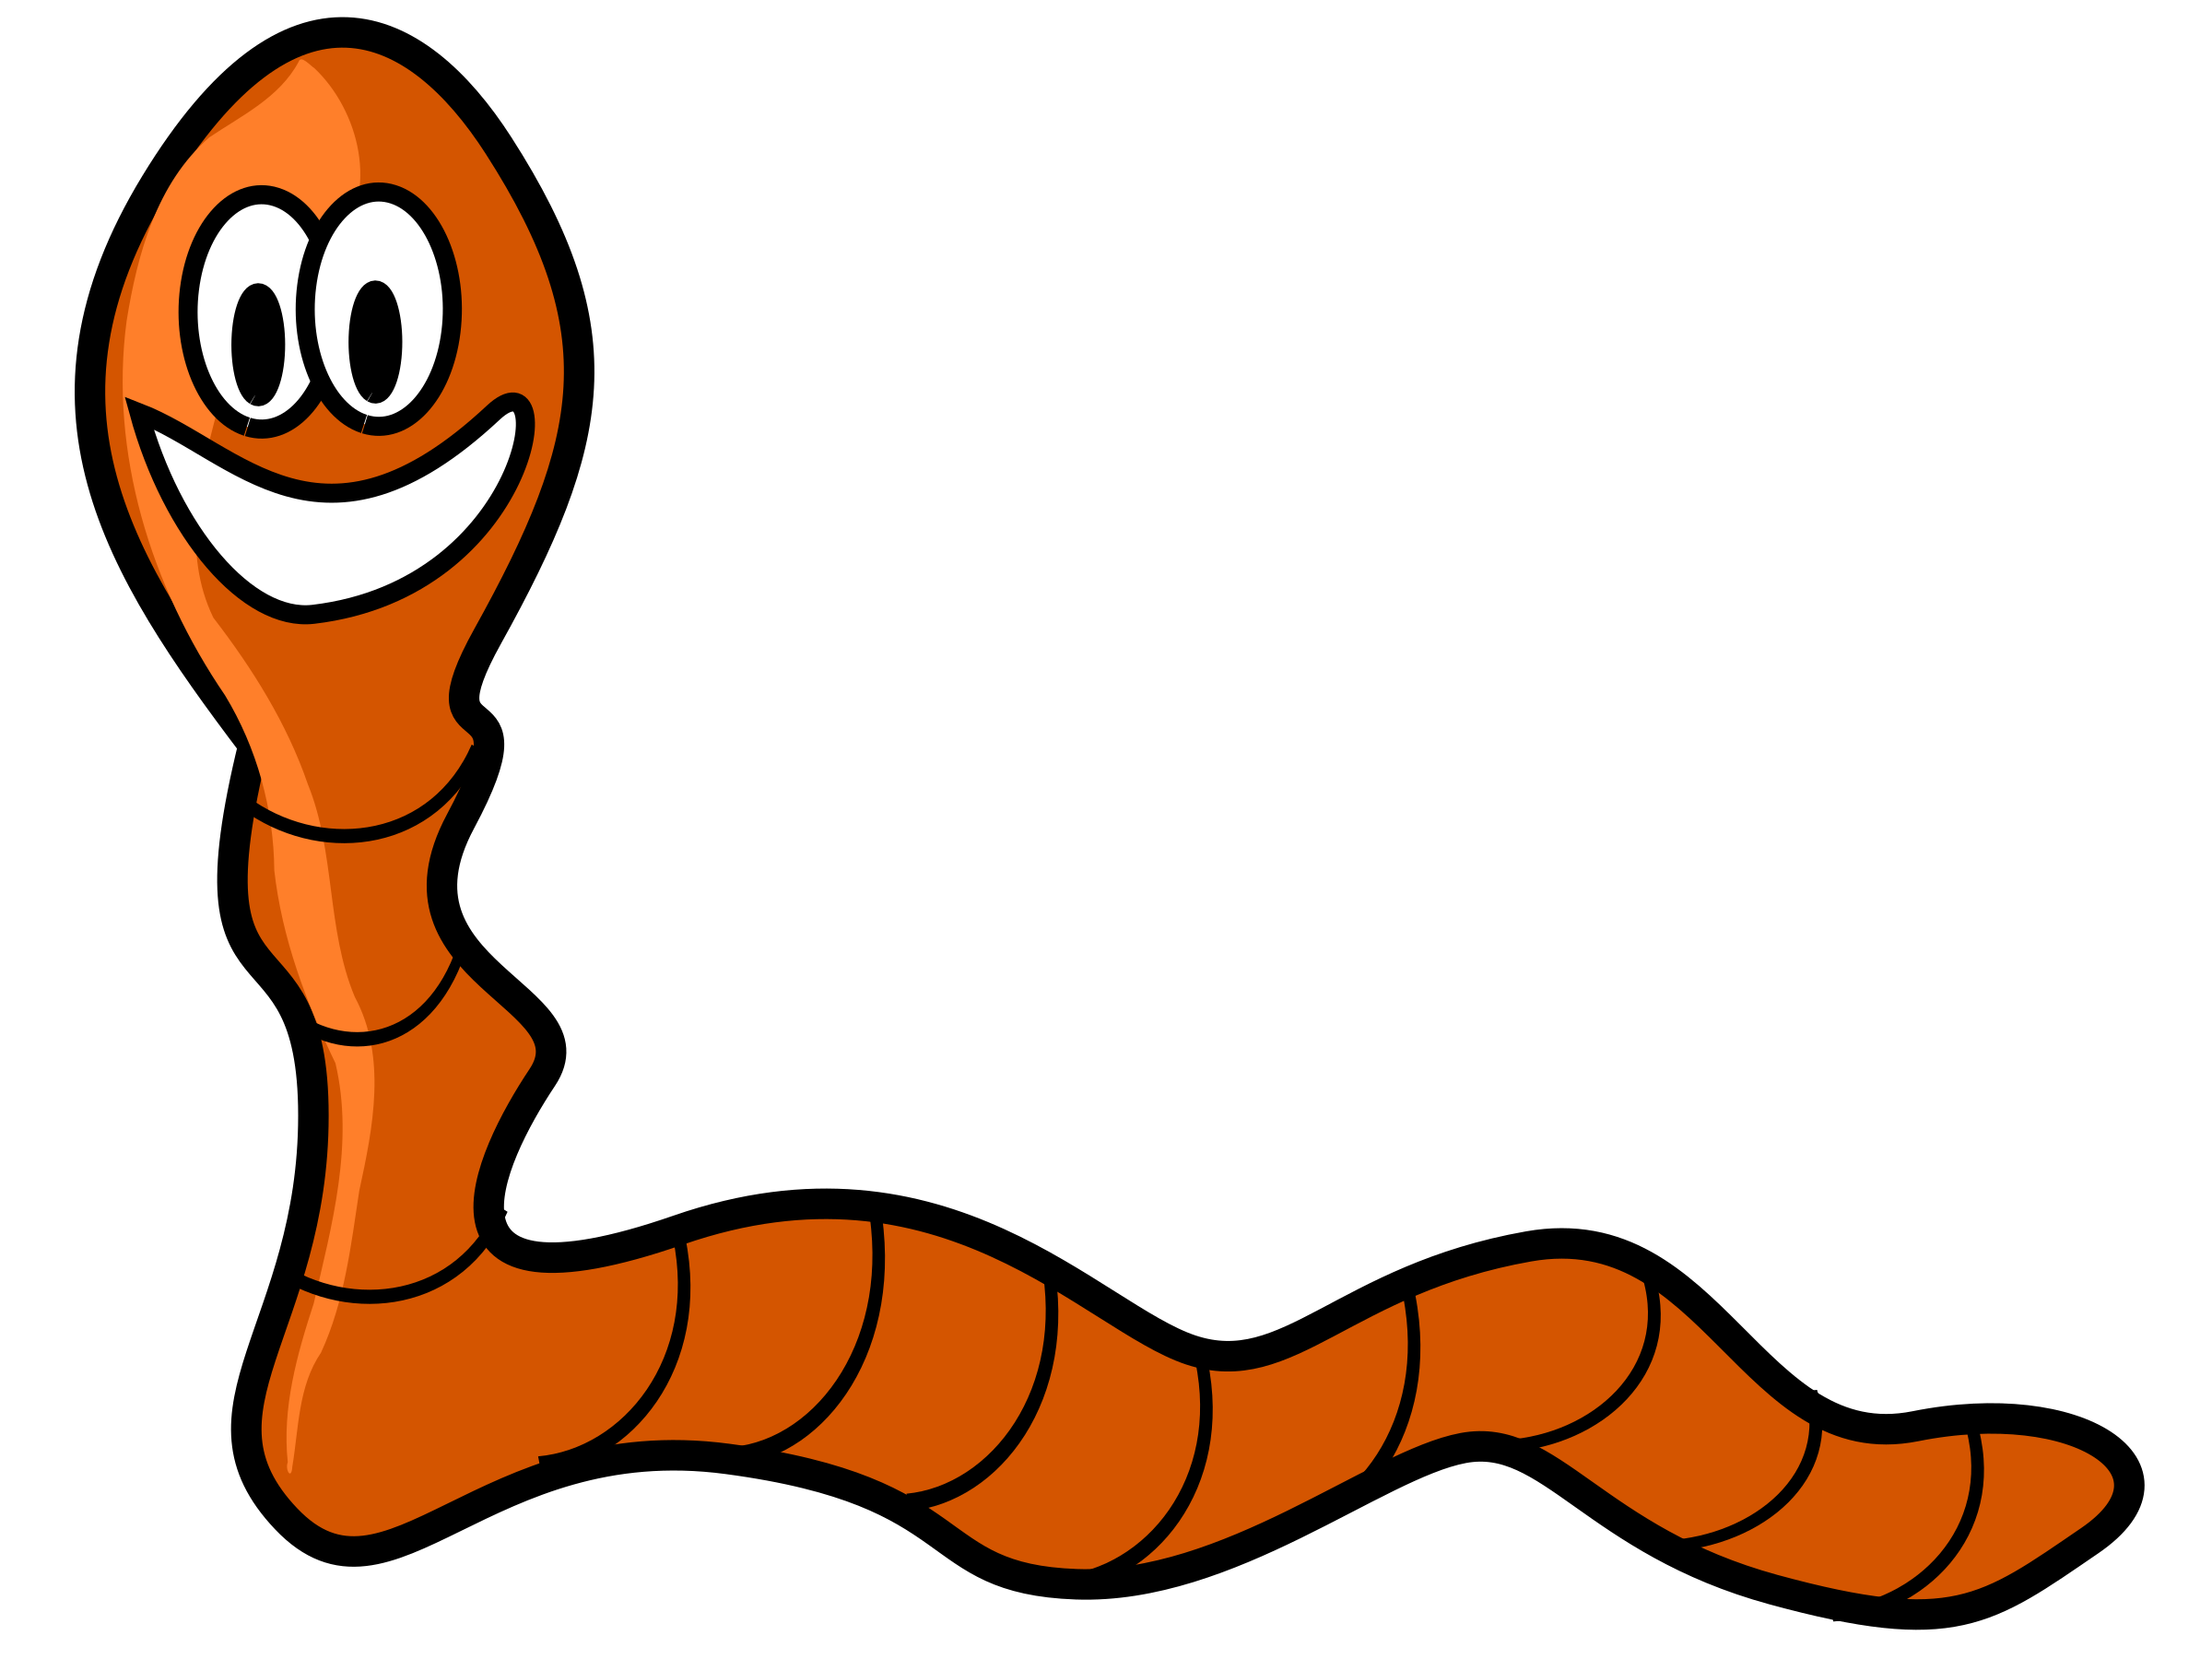 Worm clipart squirm. Ooey gooey was a